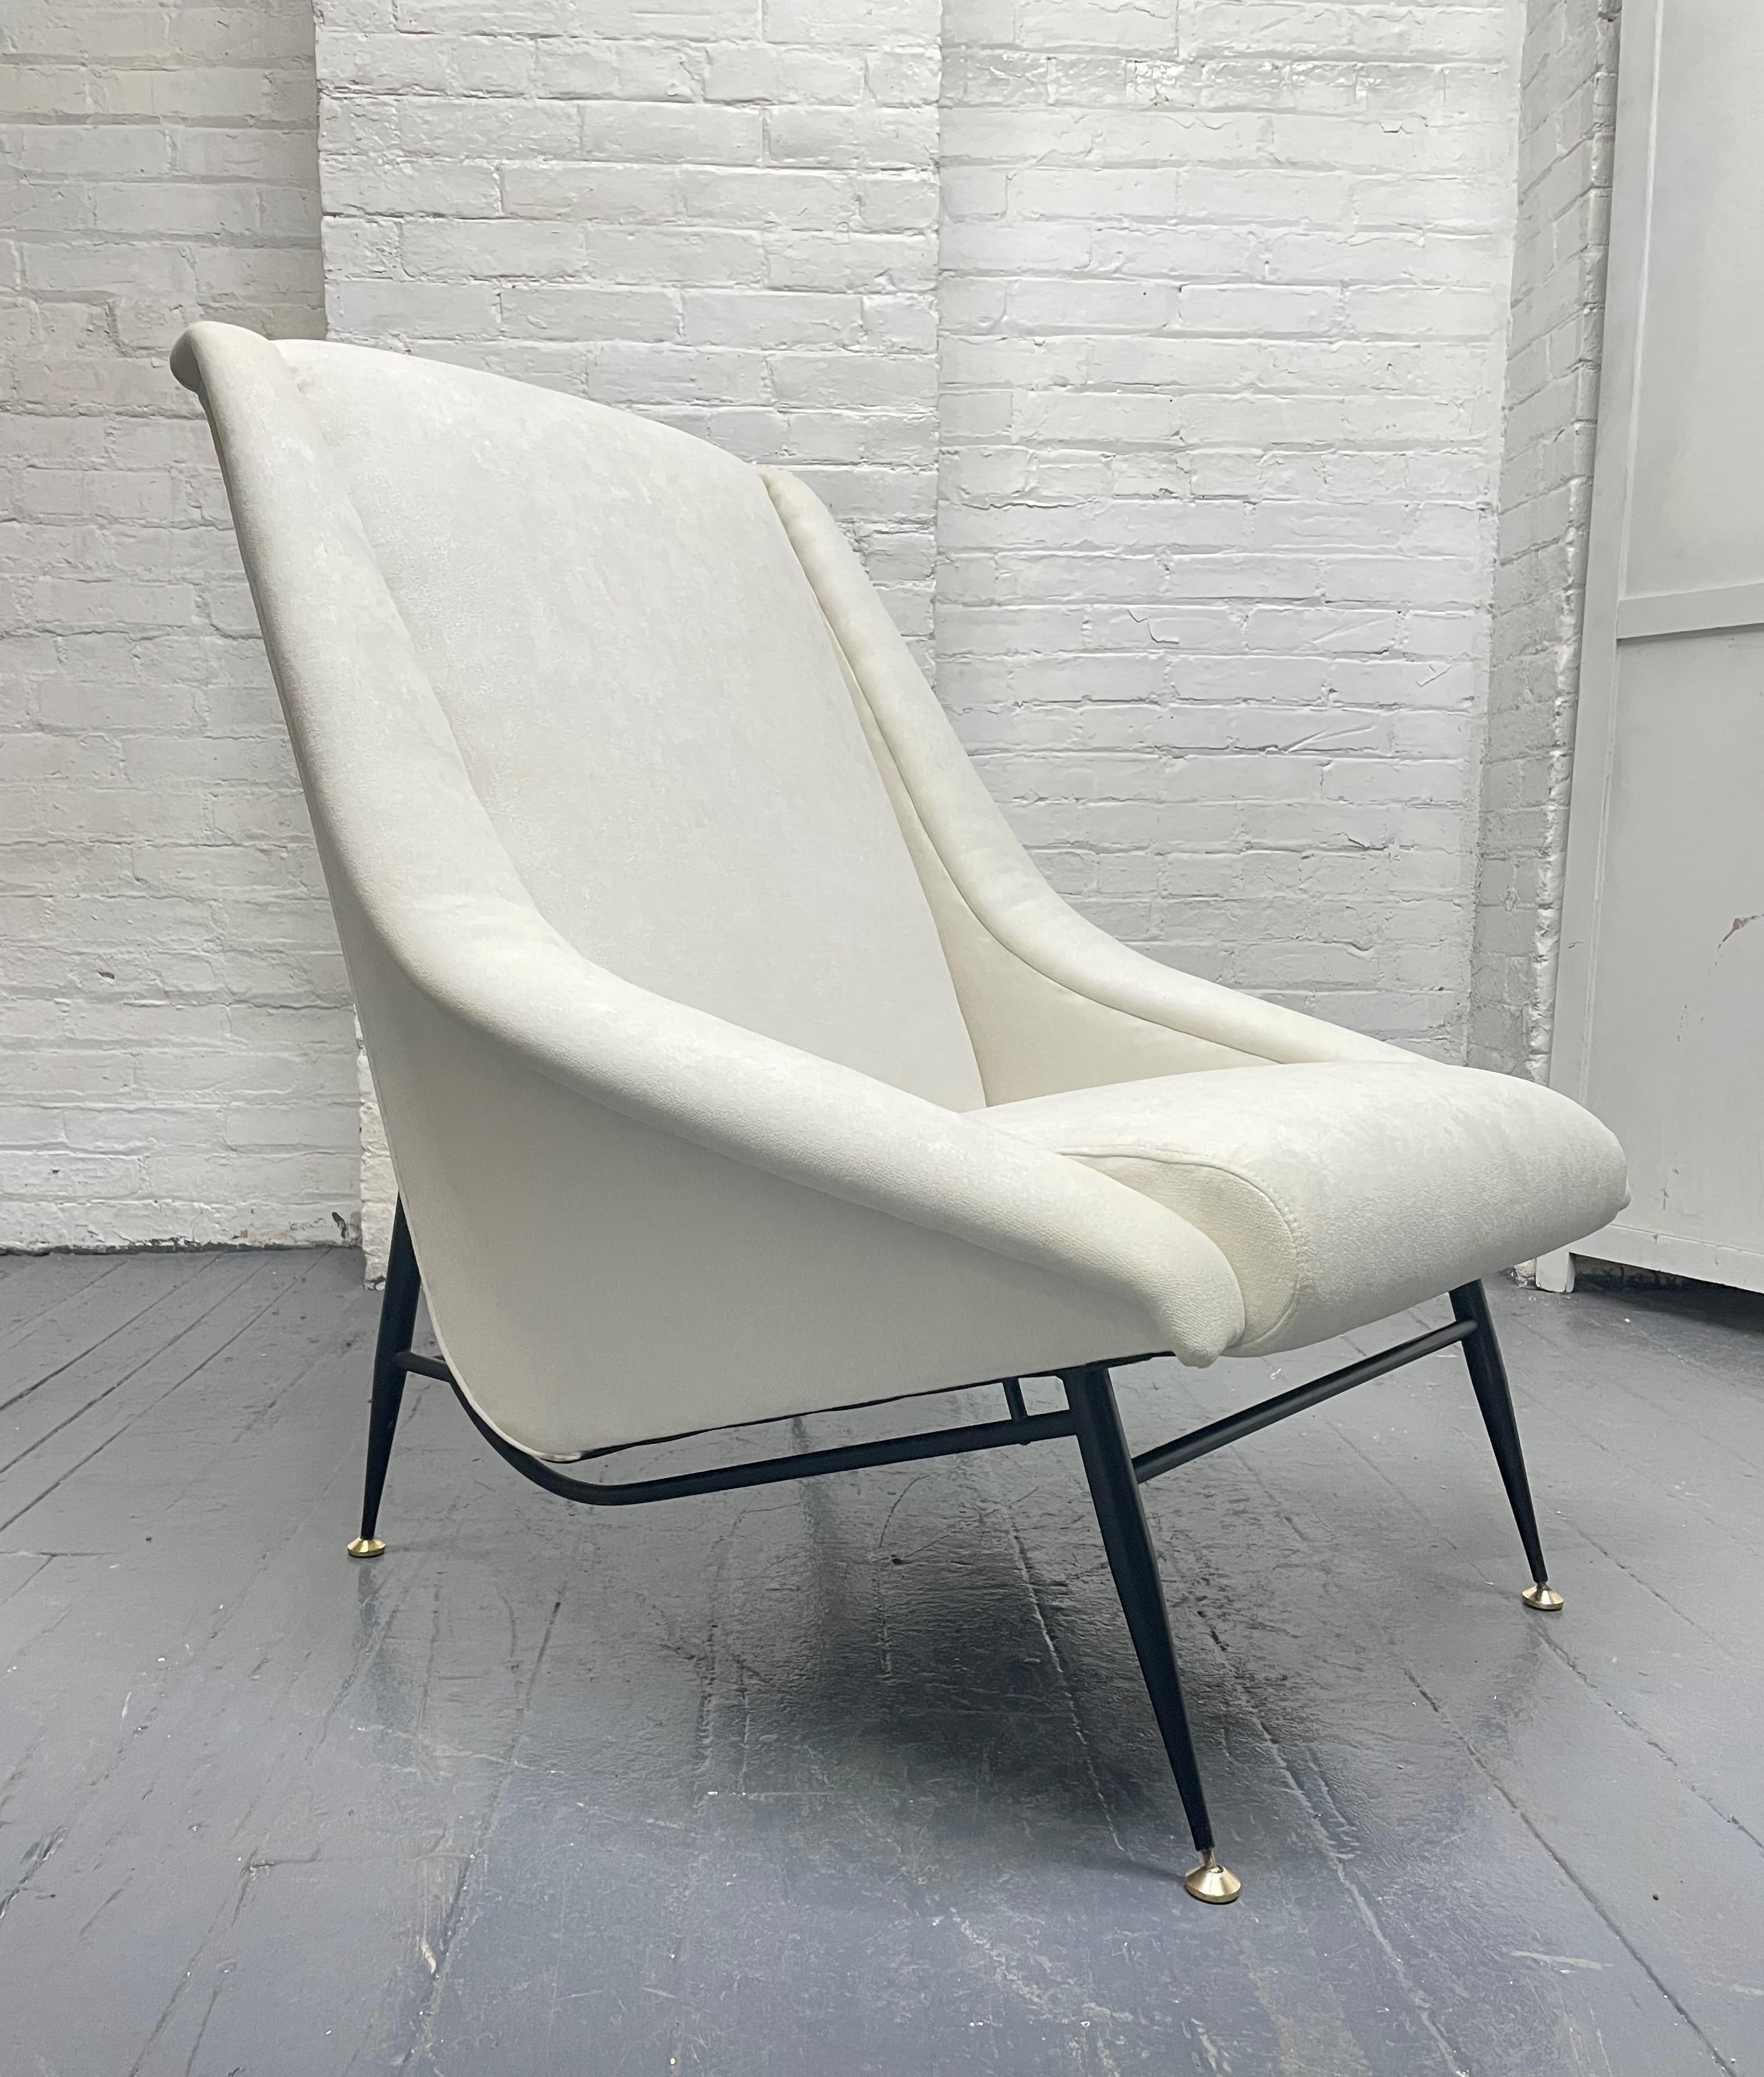 Enameled Pair of 1960s French Lounge Chairs by Henri Caillon for Erton